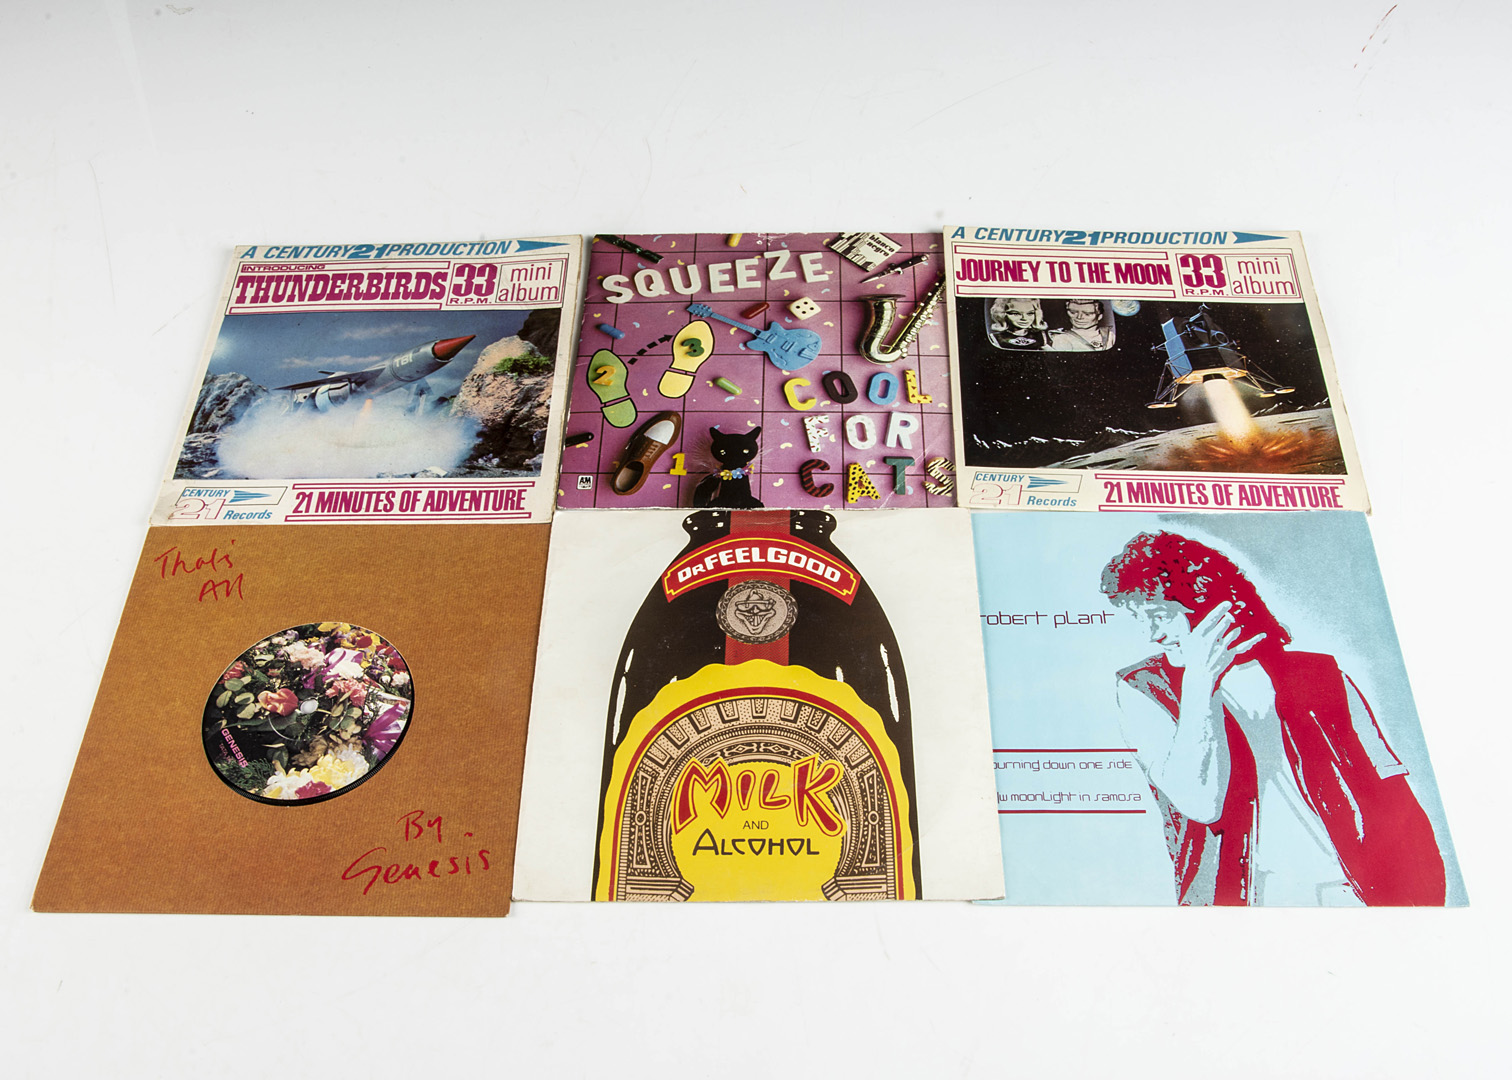 7" Singles, approximately two hundred singles of various genres with artists including Queen,